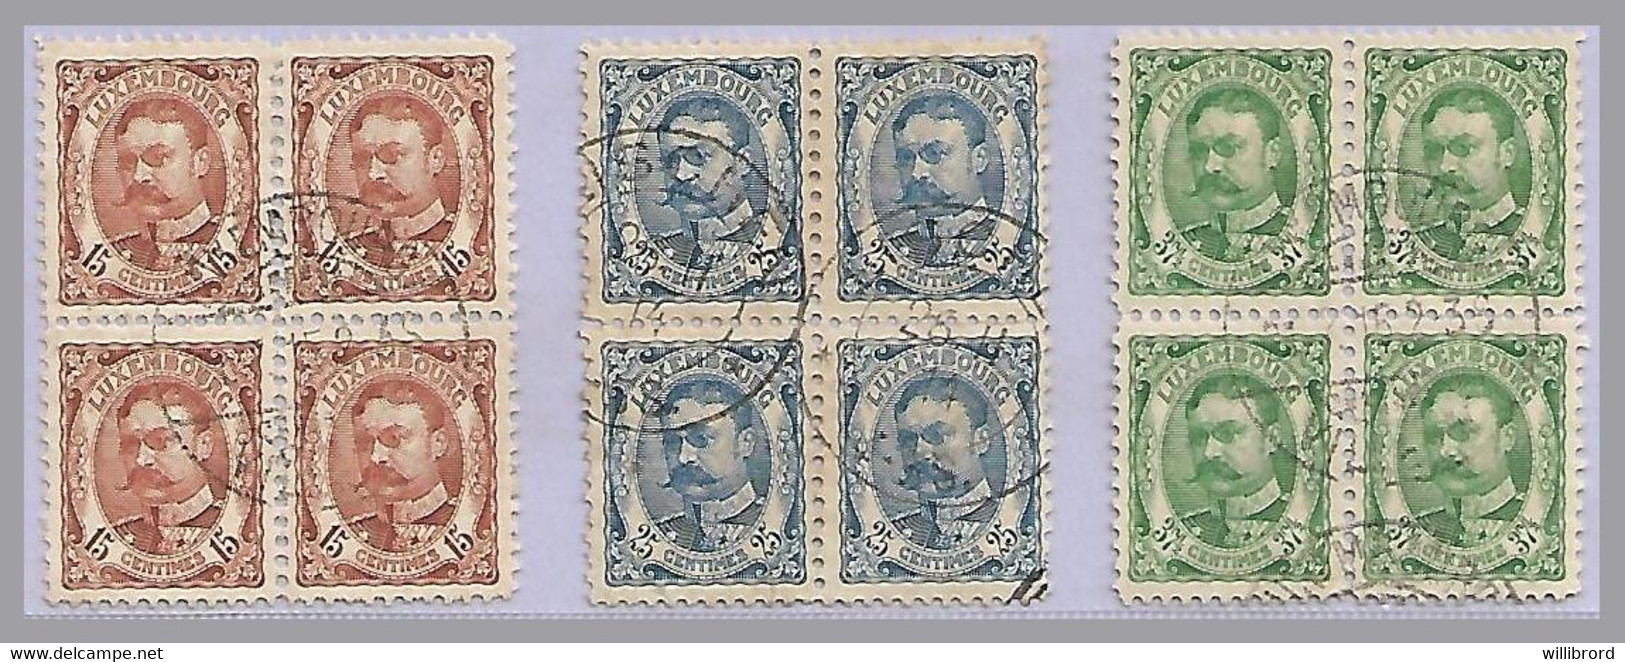 LUXEMBOURG - G.D. William IV - Used Blocks Of 4 - 15c, 25c, 37½c - 1906 Guillermo IV